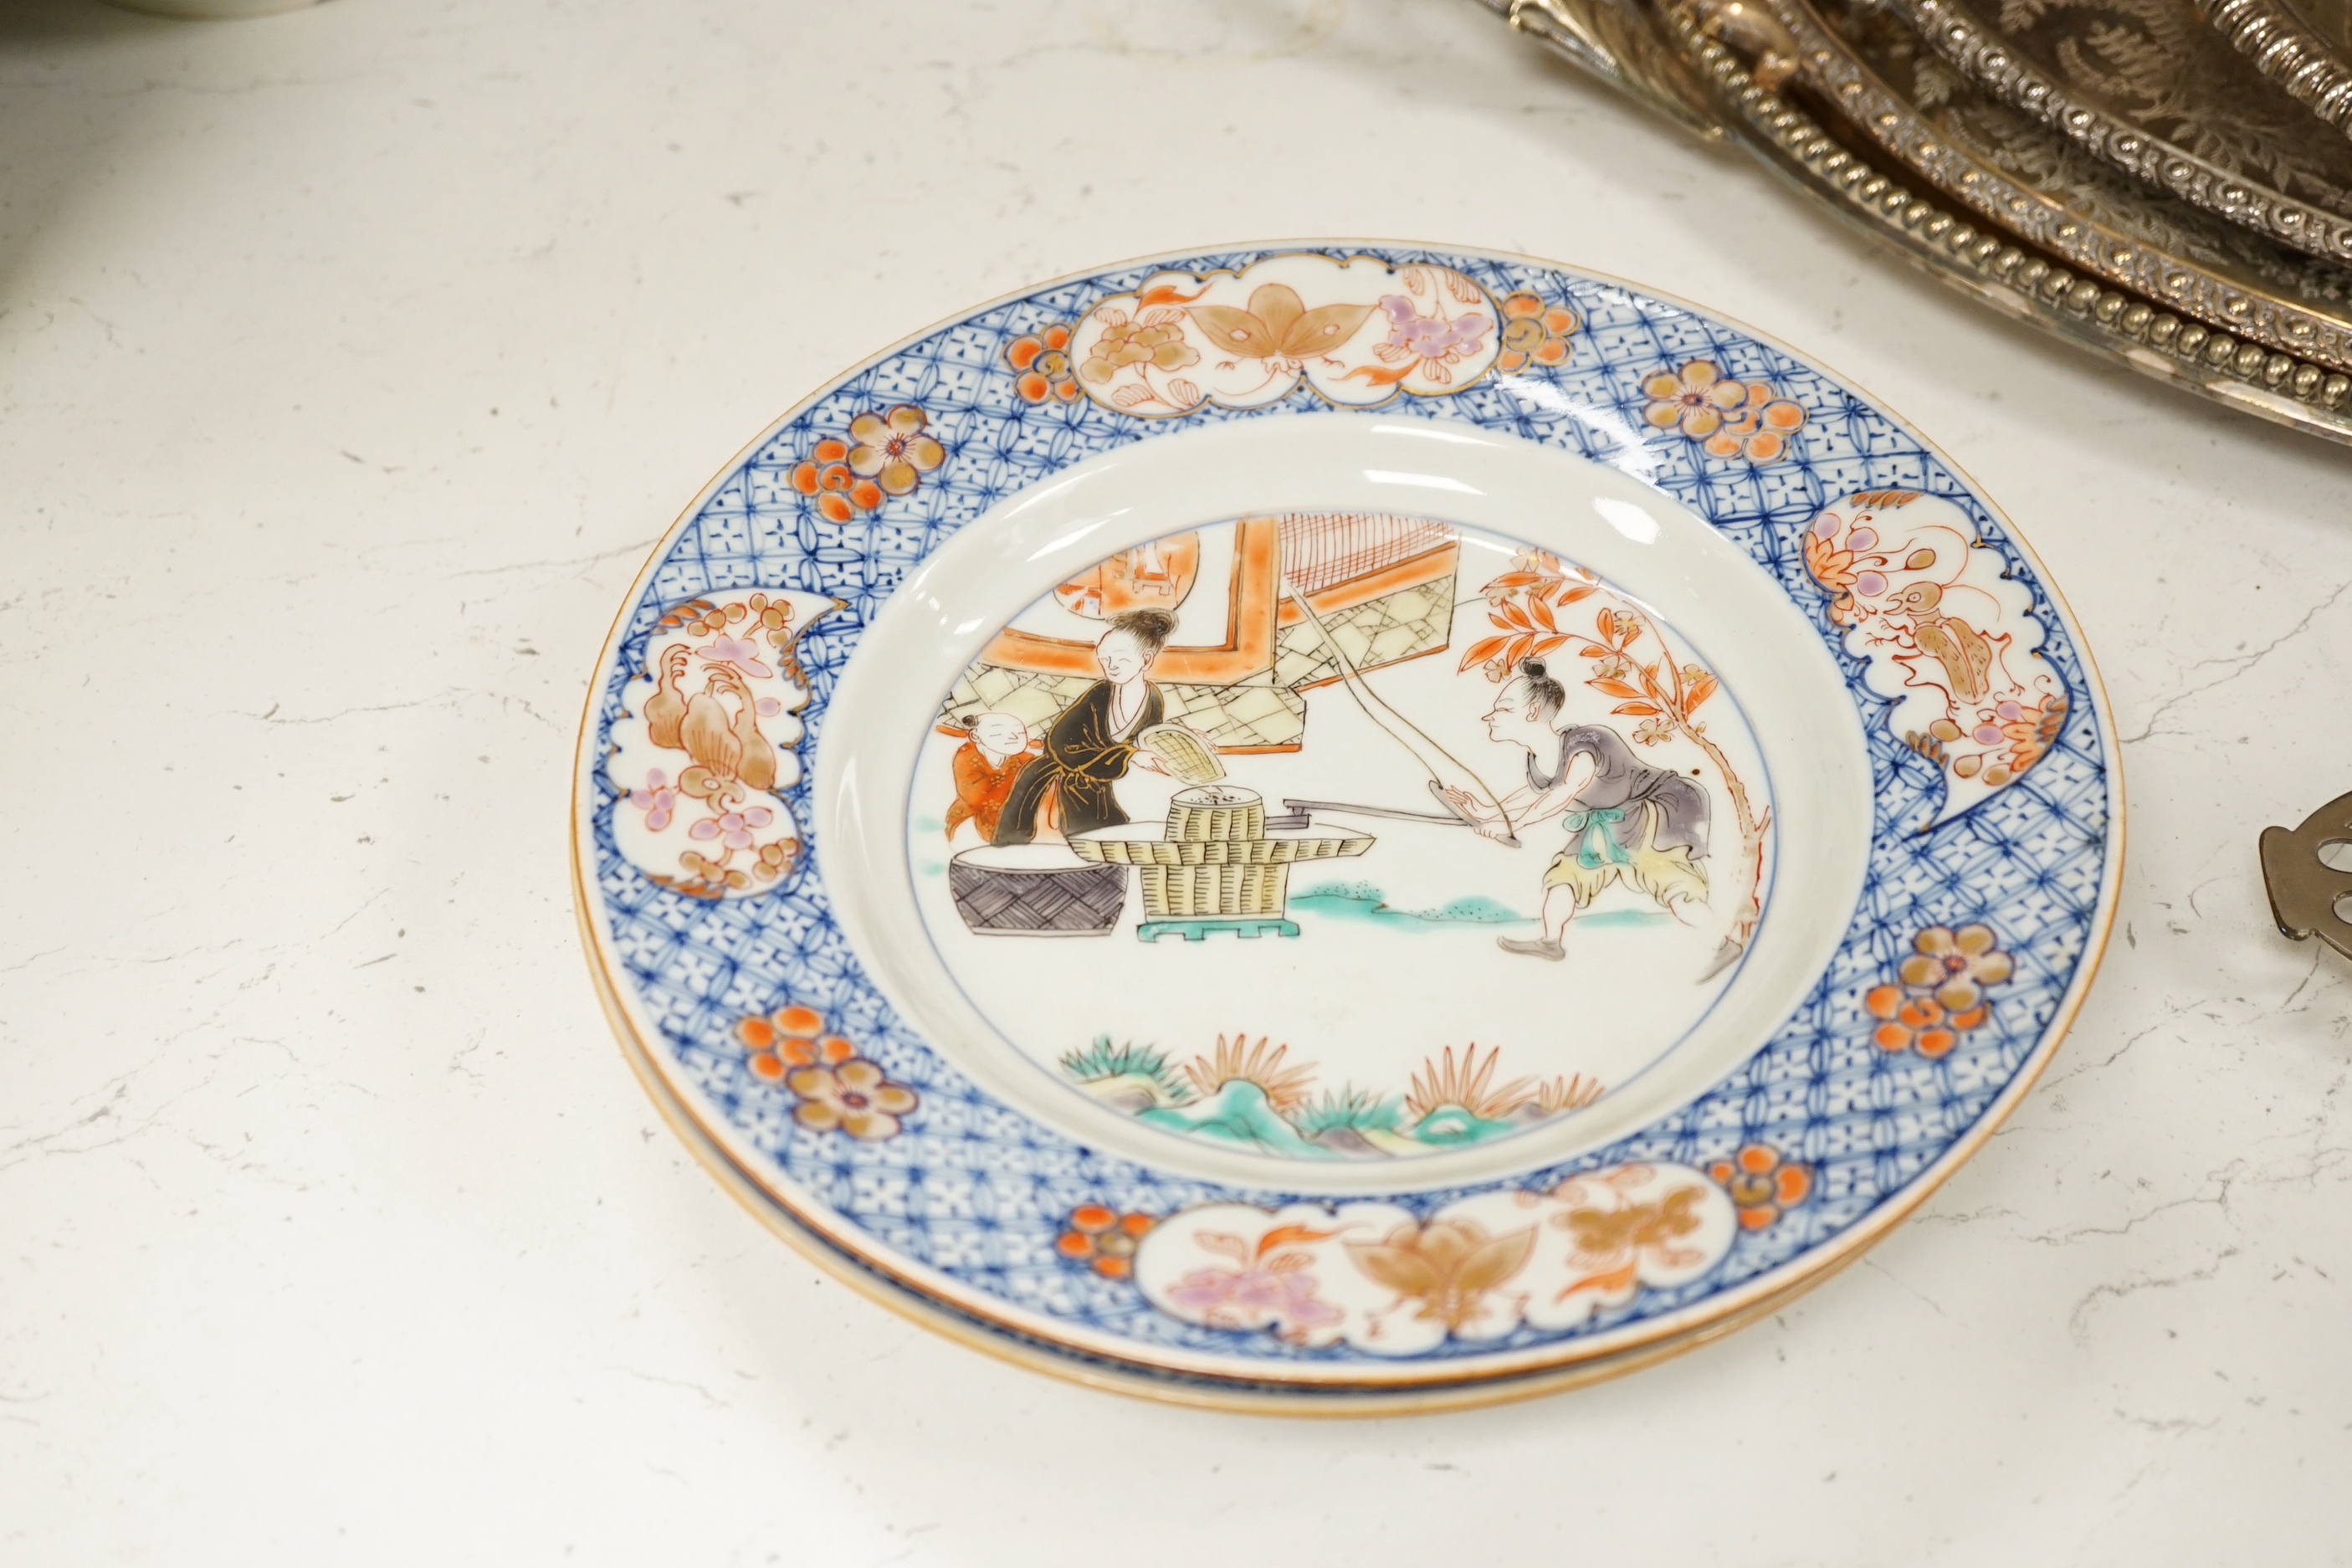 Eight Chinese plates and bowls, largest 30cm diameter